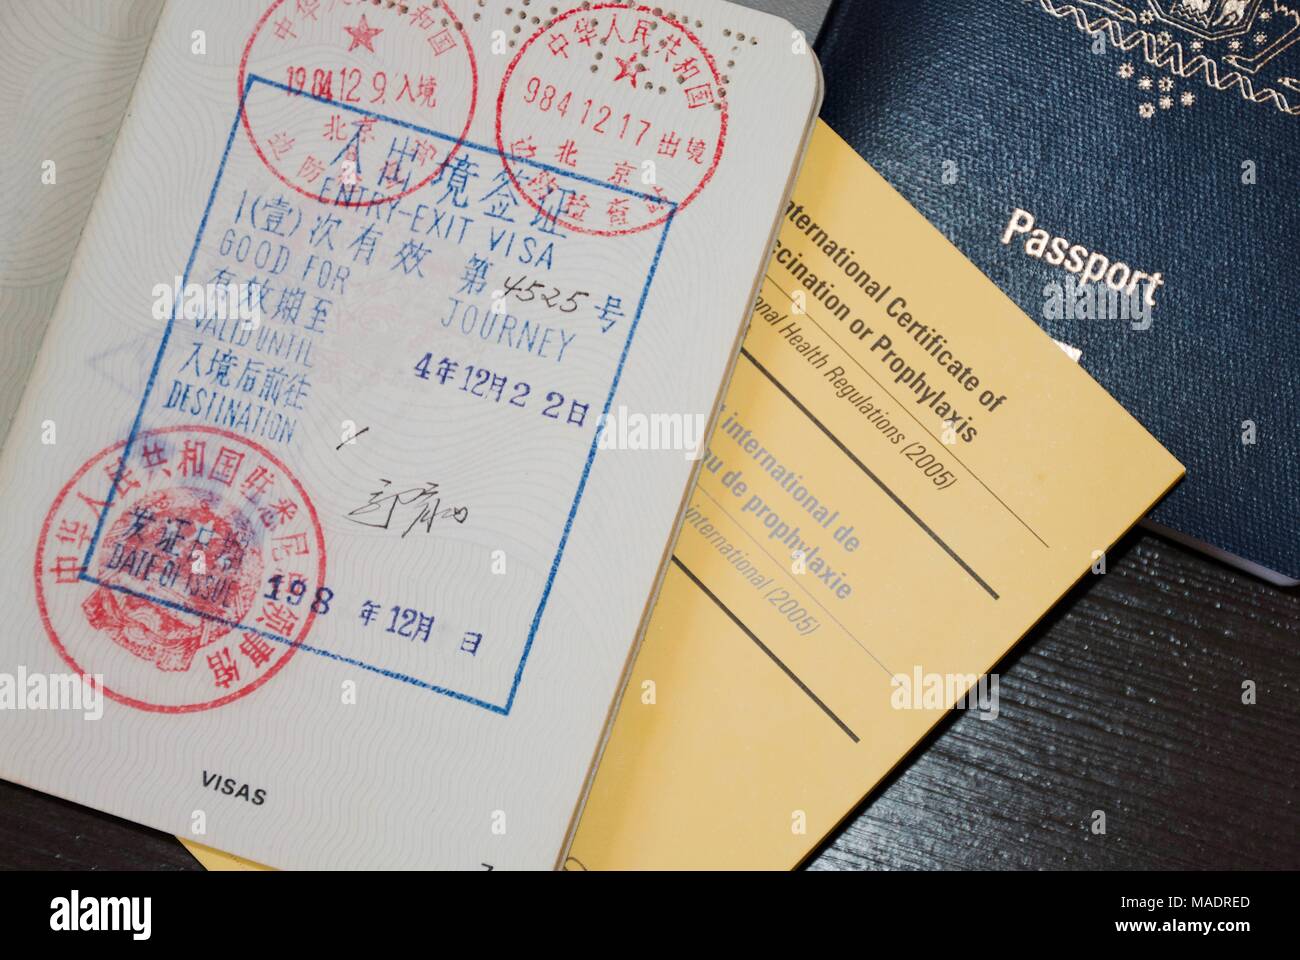 Blue Passport and open passport with asian visa stamps and an international vaccination certificate Stock Photo